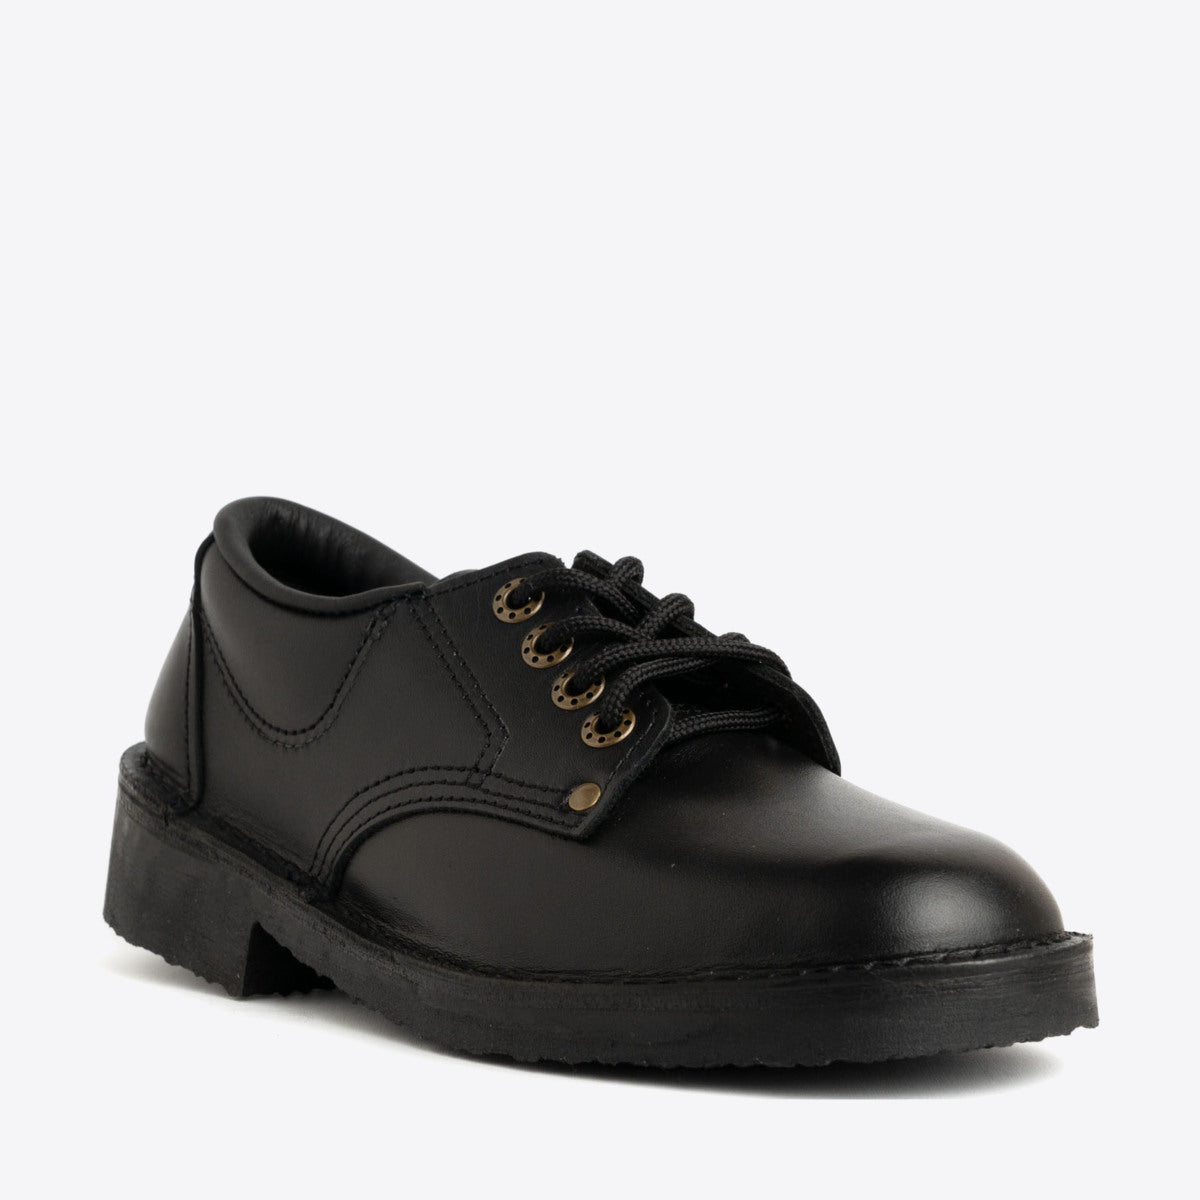 MCKINLAYS Jill Lace Up College Shoe Black Waxy - Image 2